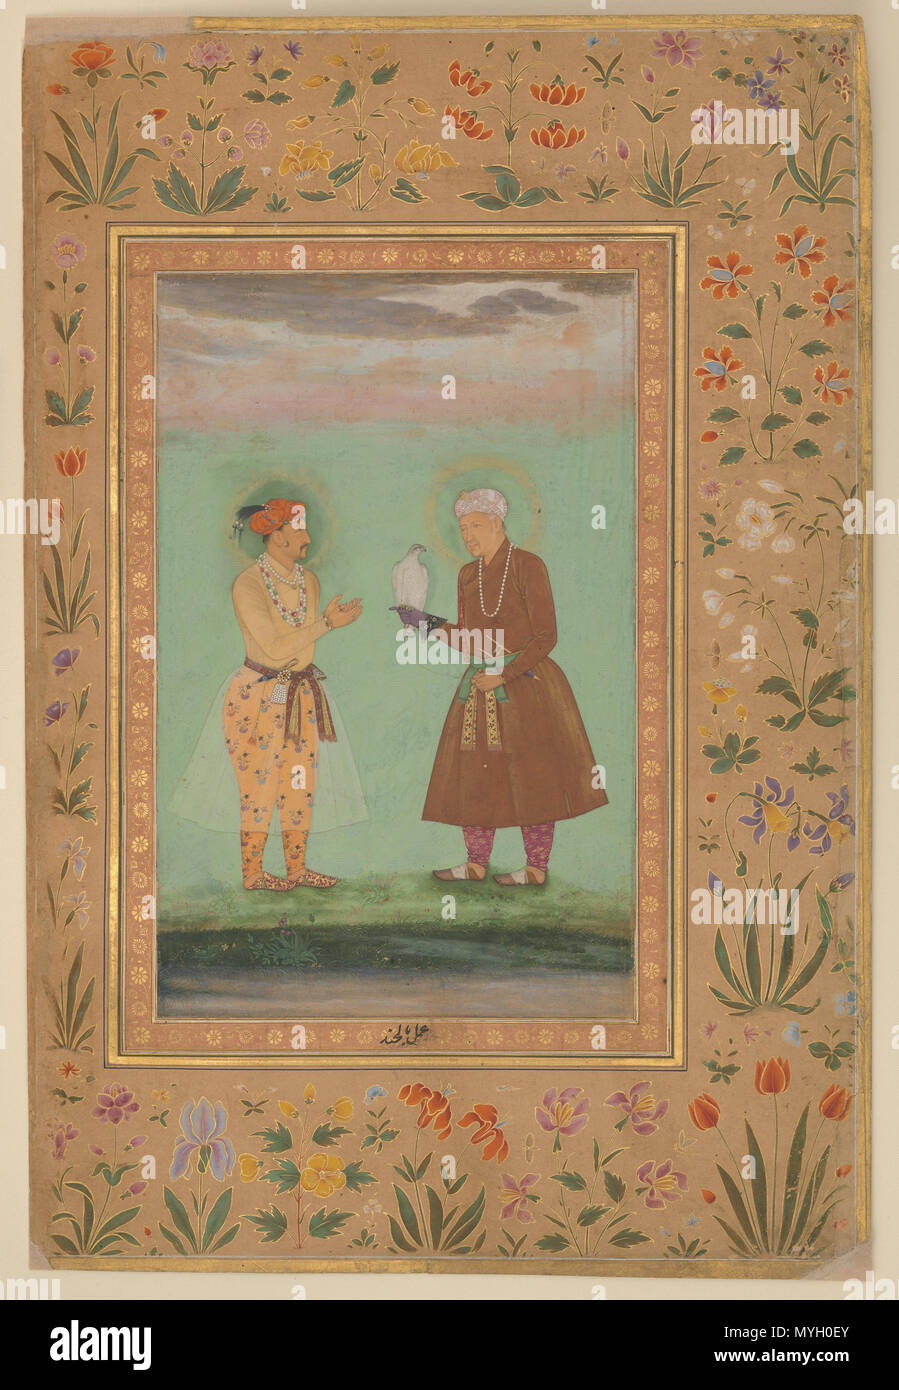 . 'Jahangir and his Father, Akbar', Folio from the Shah Jahan Album Painting by Balachand Calligrapher:  Mir 'Ali Haravi (d. ca. 1550) Object Name:  Album leaf Reign:  Shah Jahan (1628–58), verso Date:  verso: ca. 1630; recto: ca.1540–50 Geography:  India Medium:  Ink, opaque watercolor, and gold on paper Dimensions:  H. 15 3/8 in. (39 cm) W. 10 3/8 in. (26.3 cm) Classification:  Codices Credit Line:  Purchase, Rogers Fund and The Kevorkian Foundation Gift, 1955 Accession Number:  55.121.10.19 This artwork is not on display  Share  Add to MyMet   Signatures, Inscriptions, and Markings   Signat Stock Photo